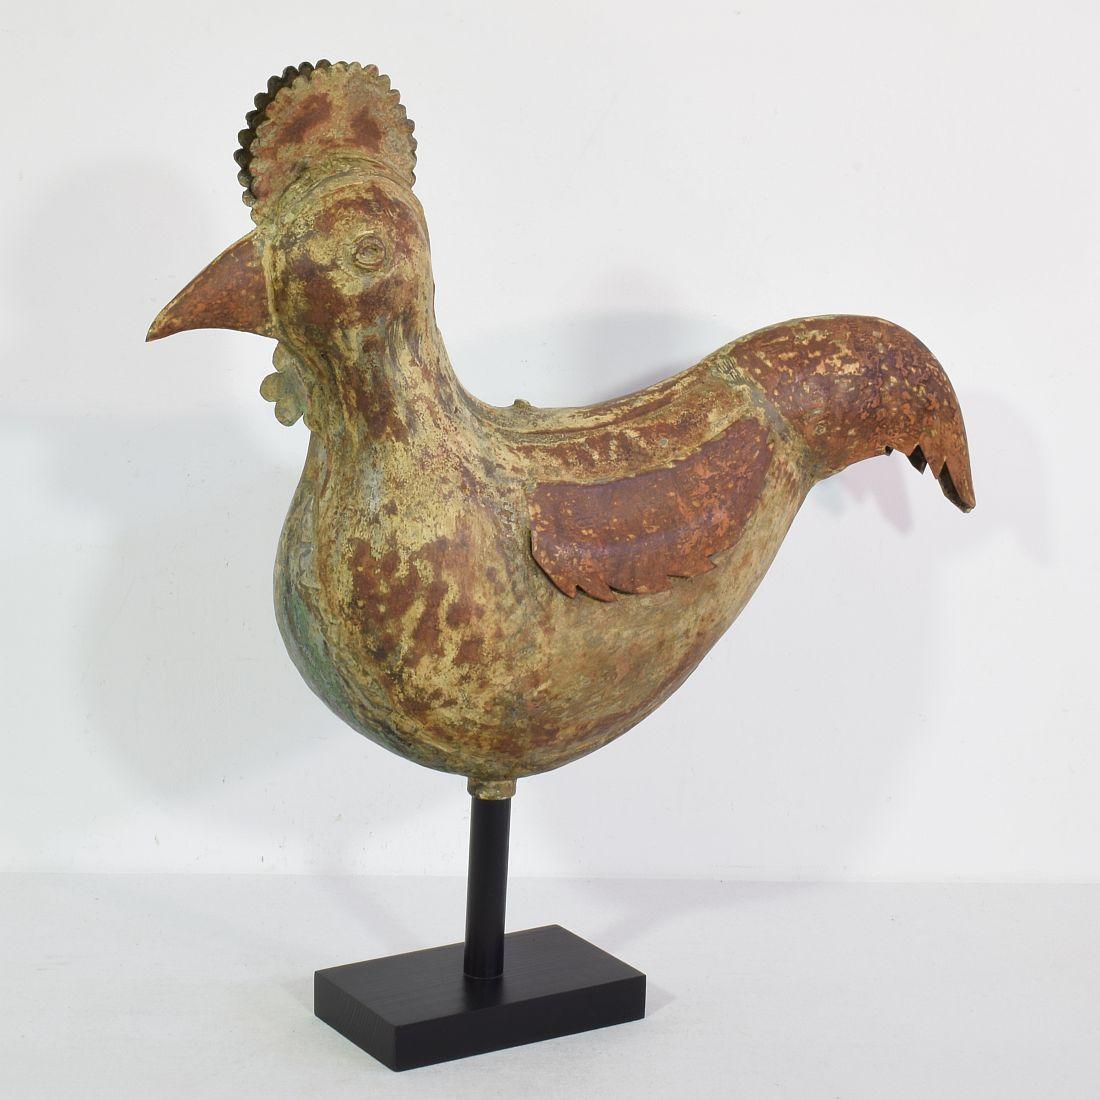 Beautiful metal weathervane representing a rooster or cockerel,
France, 1850-1900. 
Weathered and small losses. Measurement here below is inclusive the wooden base.